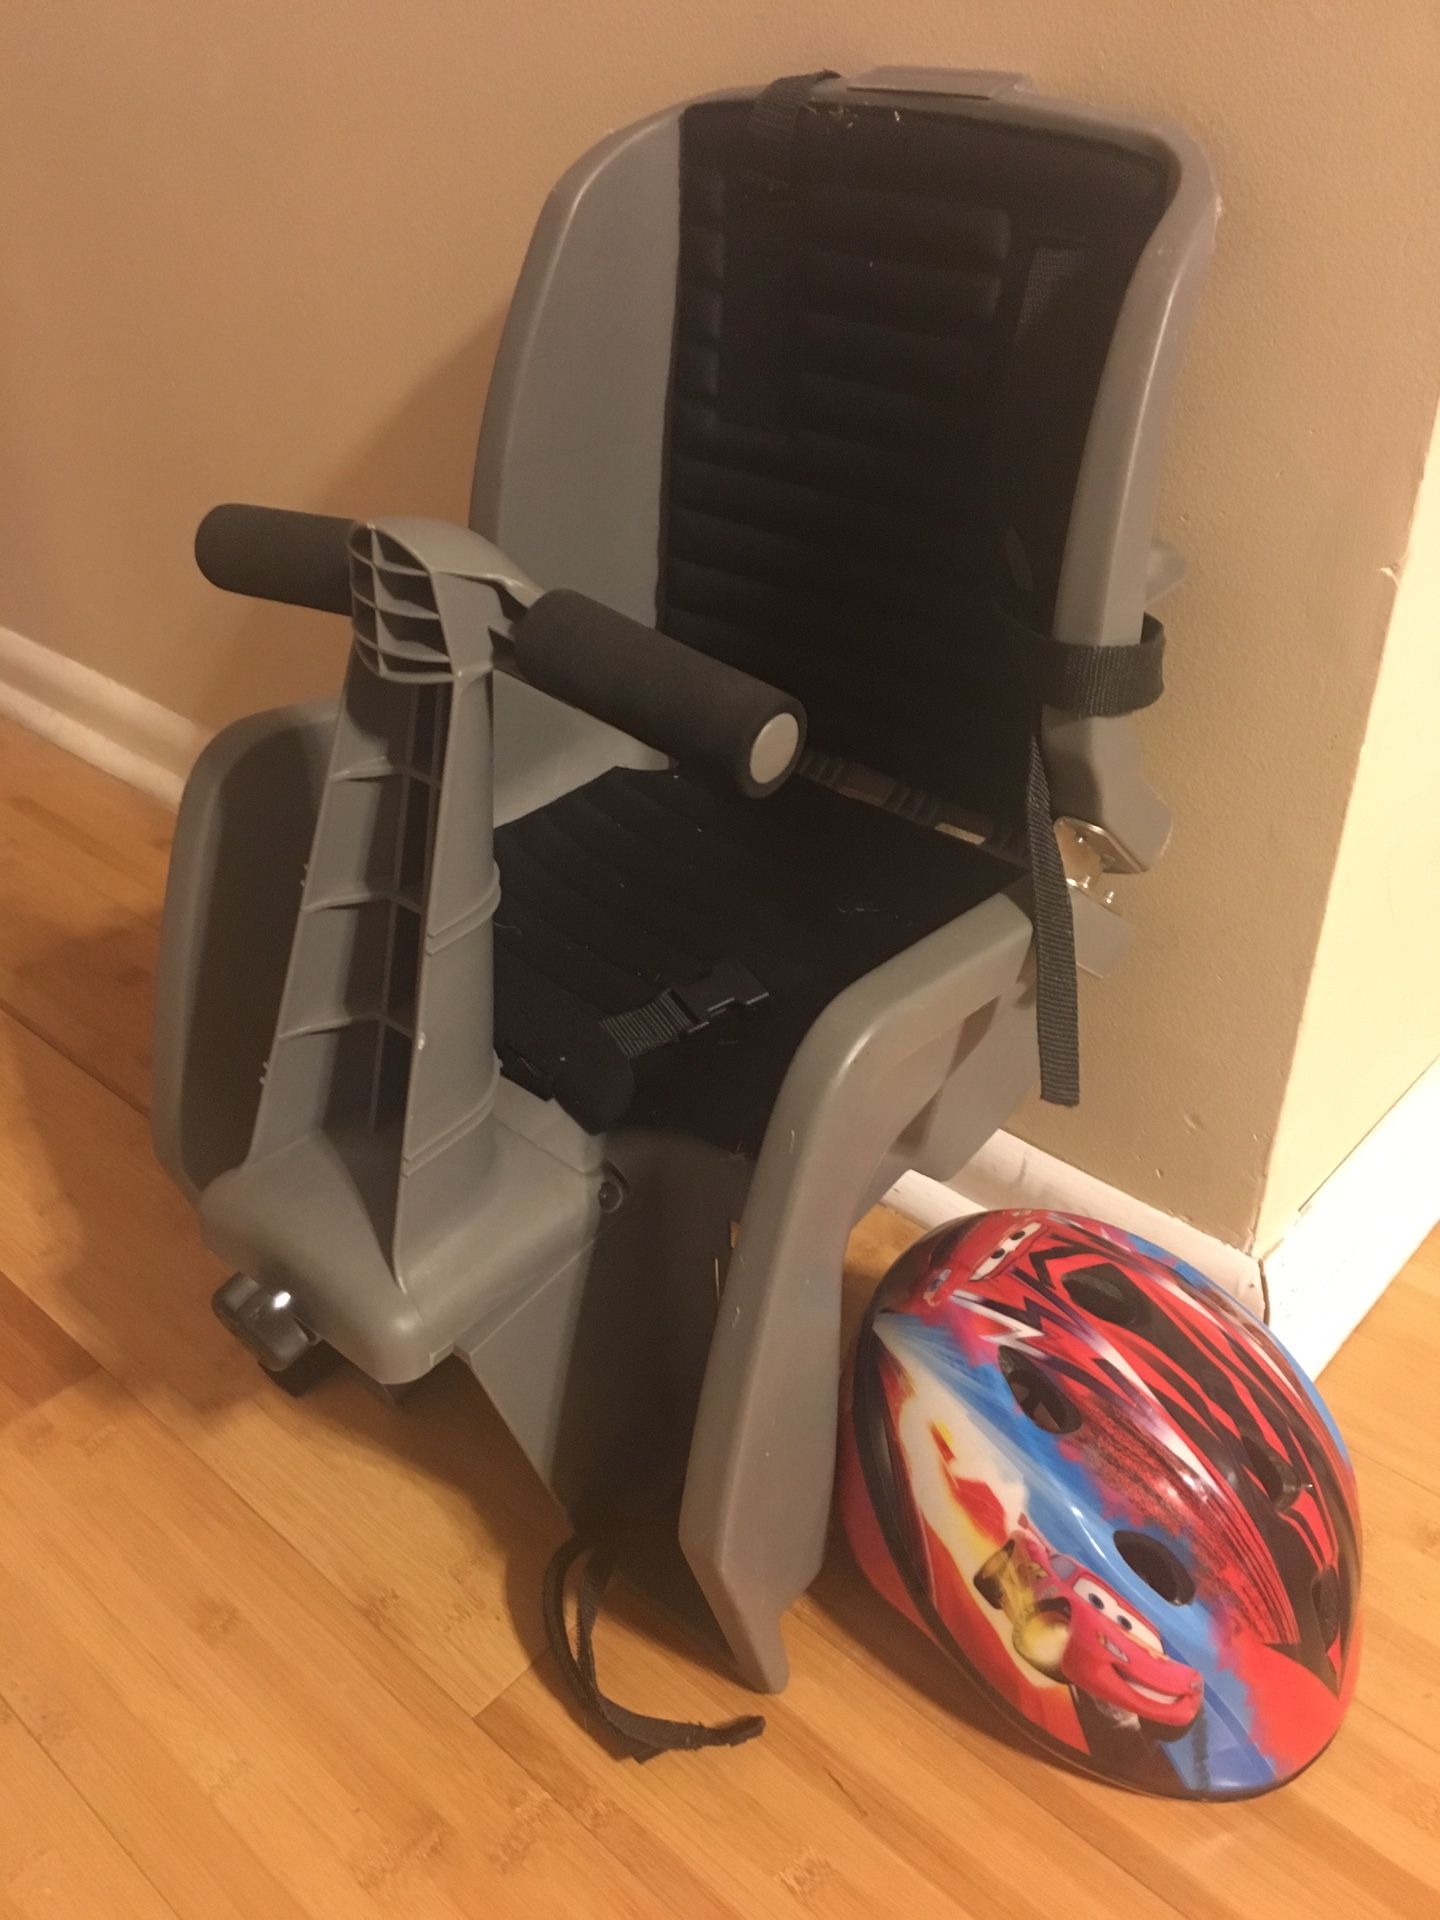 Giant bike seat for toddlers